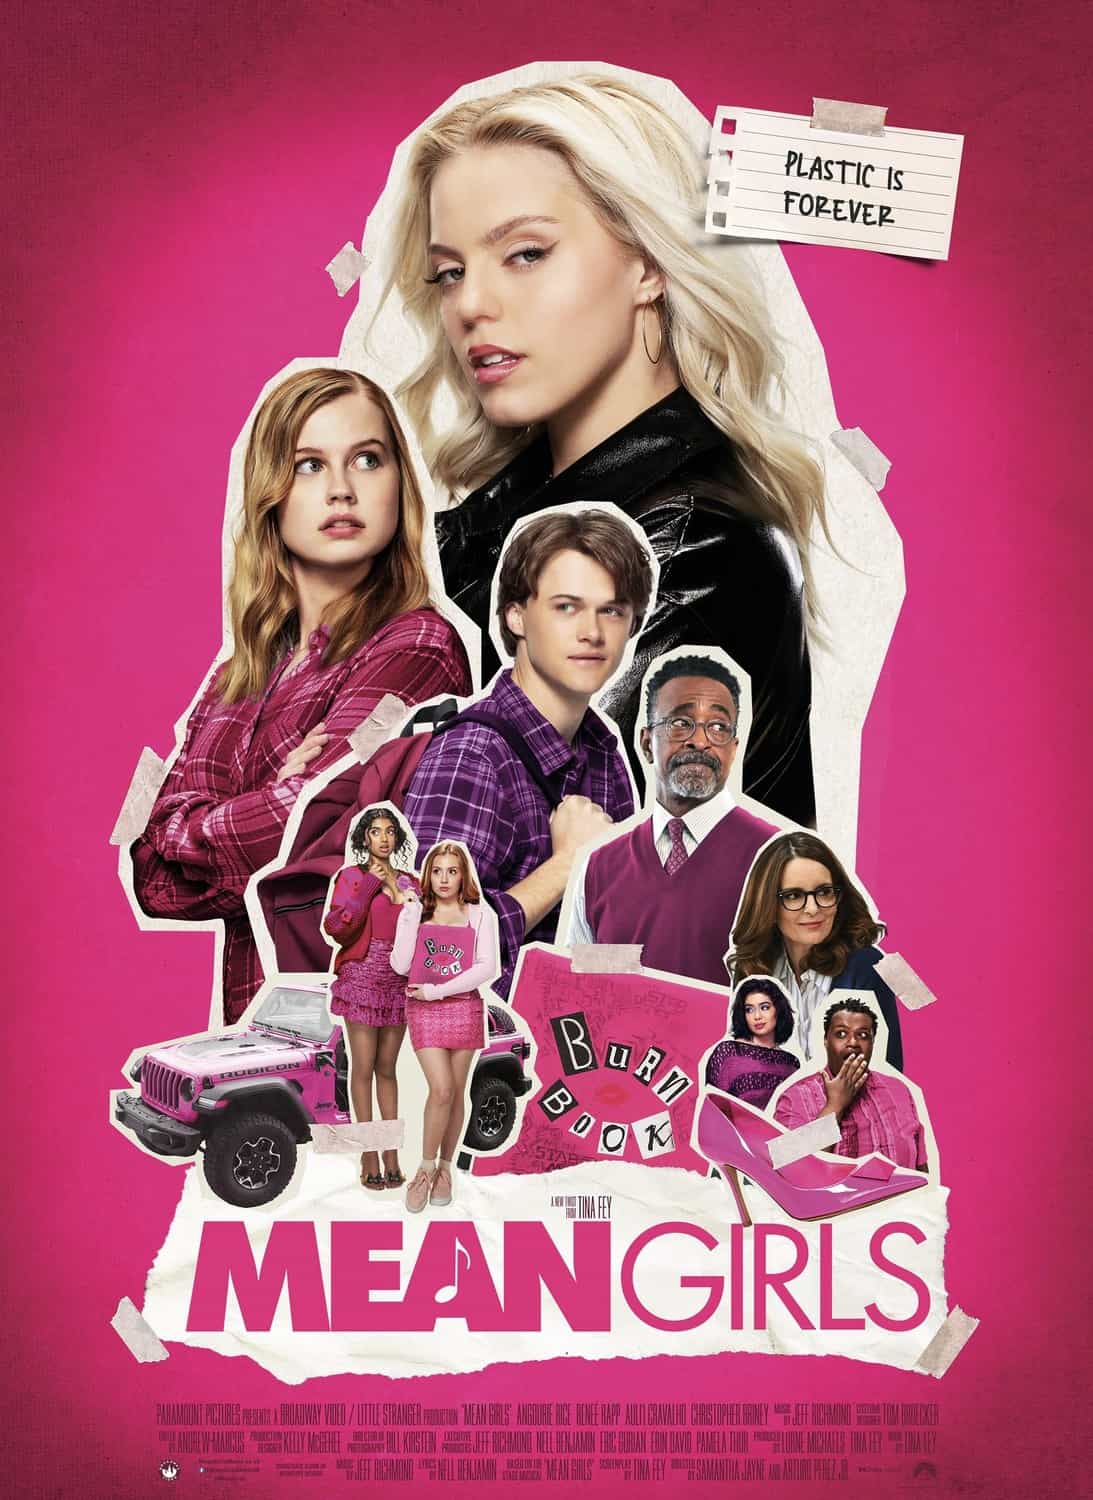 Check out the new trailer and poster for upcoming movie Mean Girls which stars Tina Fey and Jon Hamm - movie UK release date 19th January 2024 #meangirls